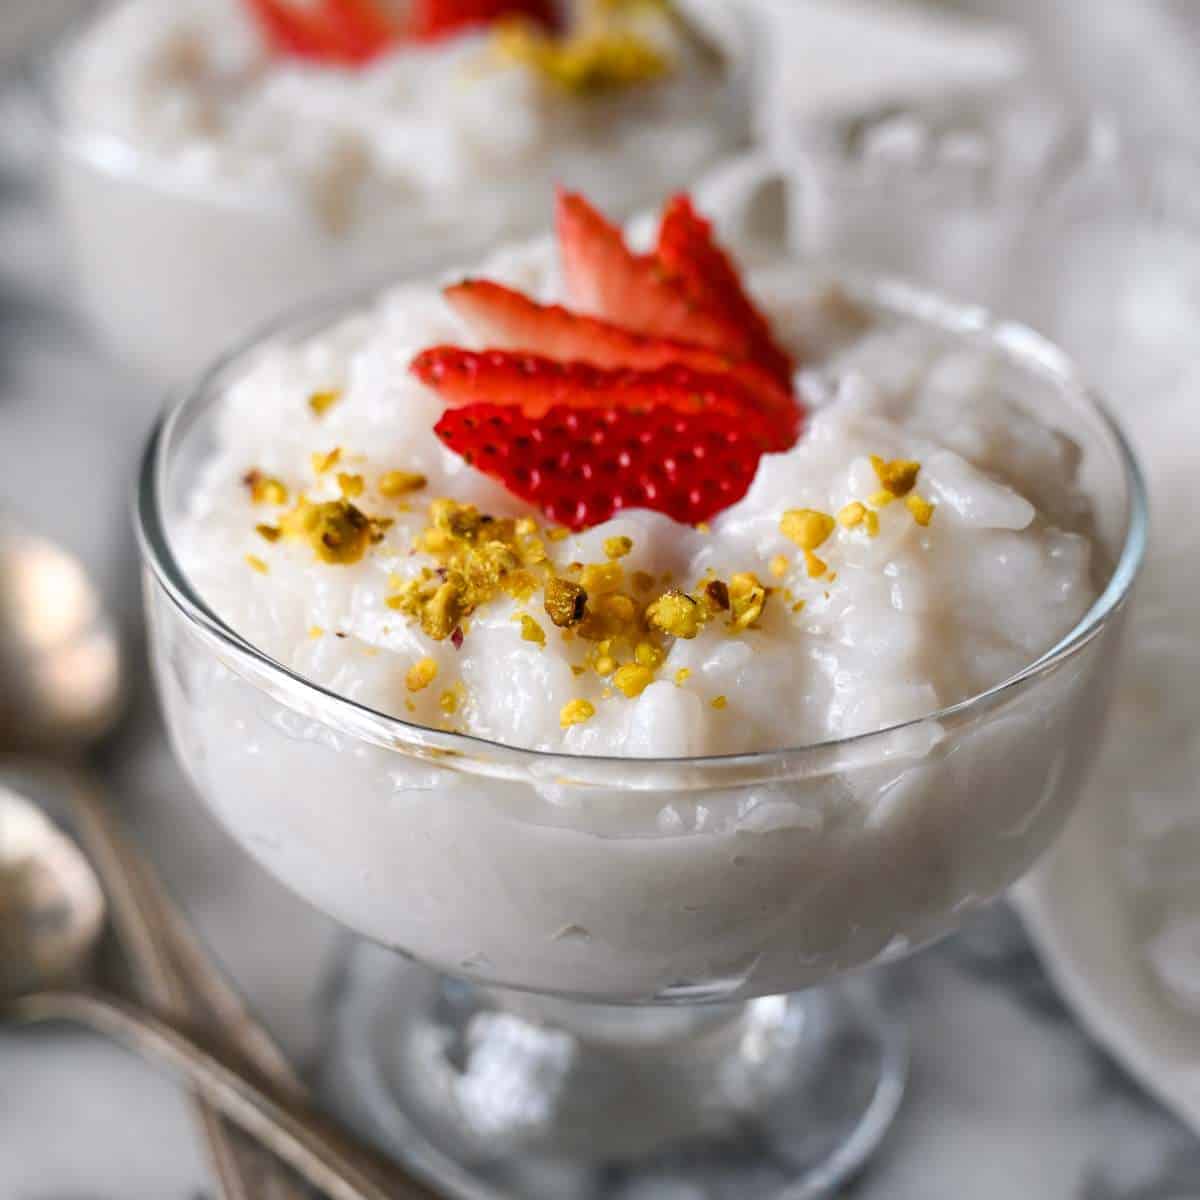 riz bi haleeb a clear bowl of lebanese rice pudding with strawberry and pistachios as garnish